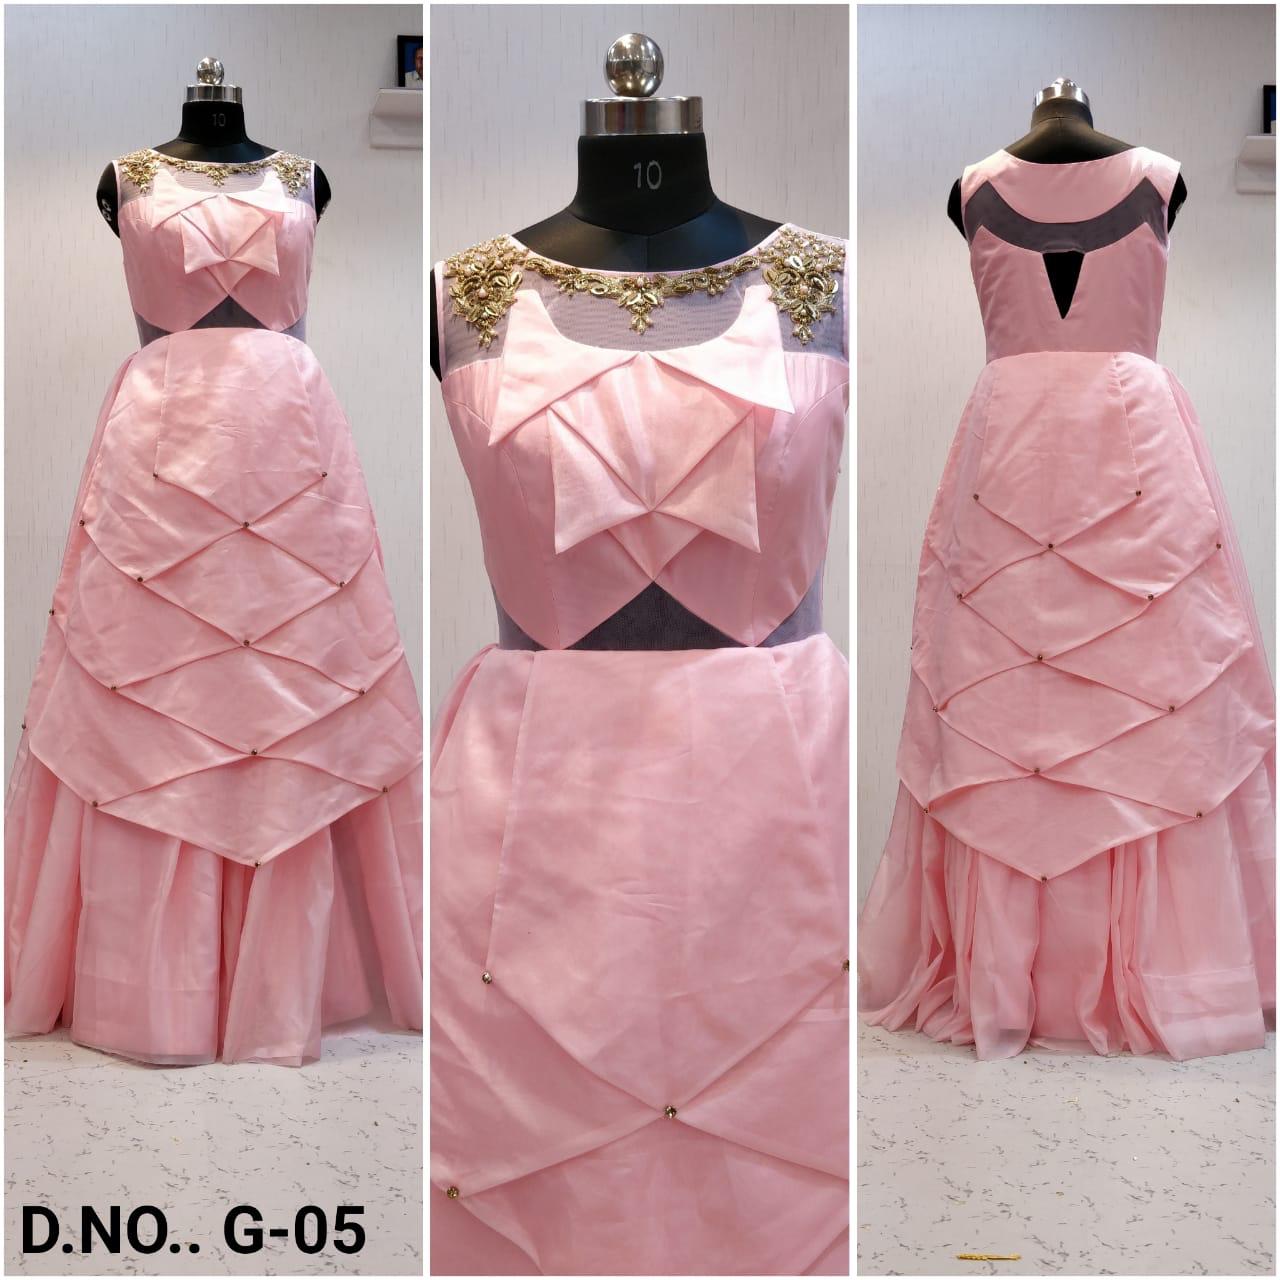 Gown G 05